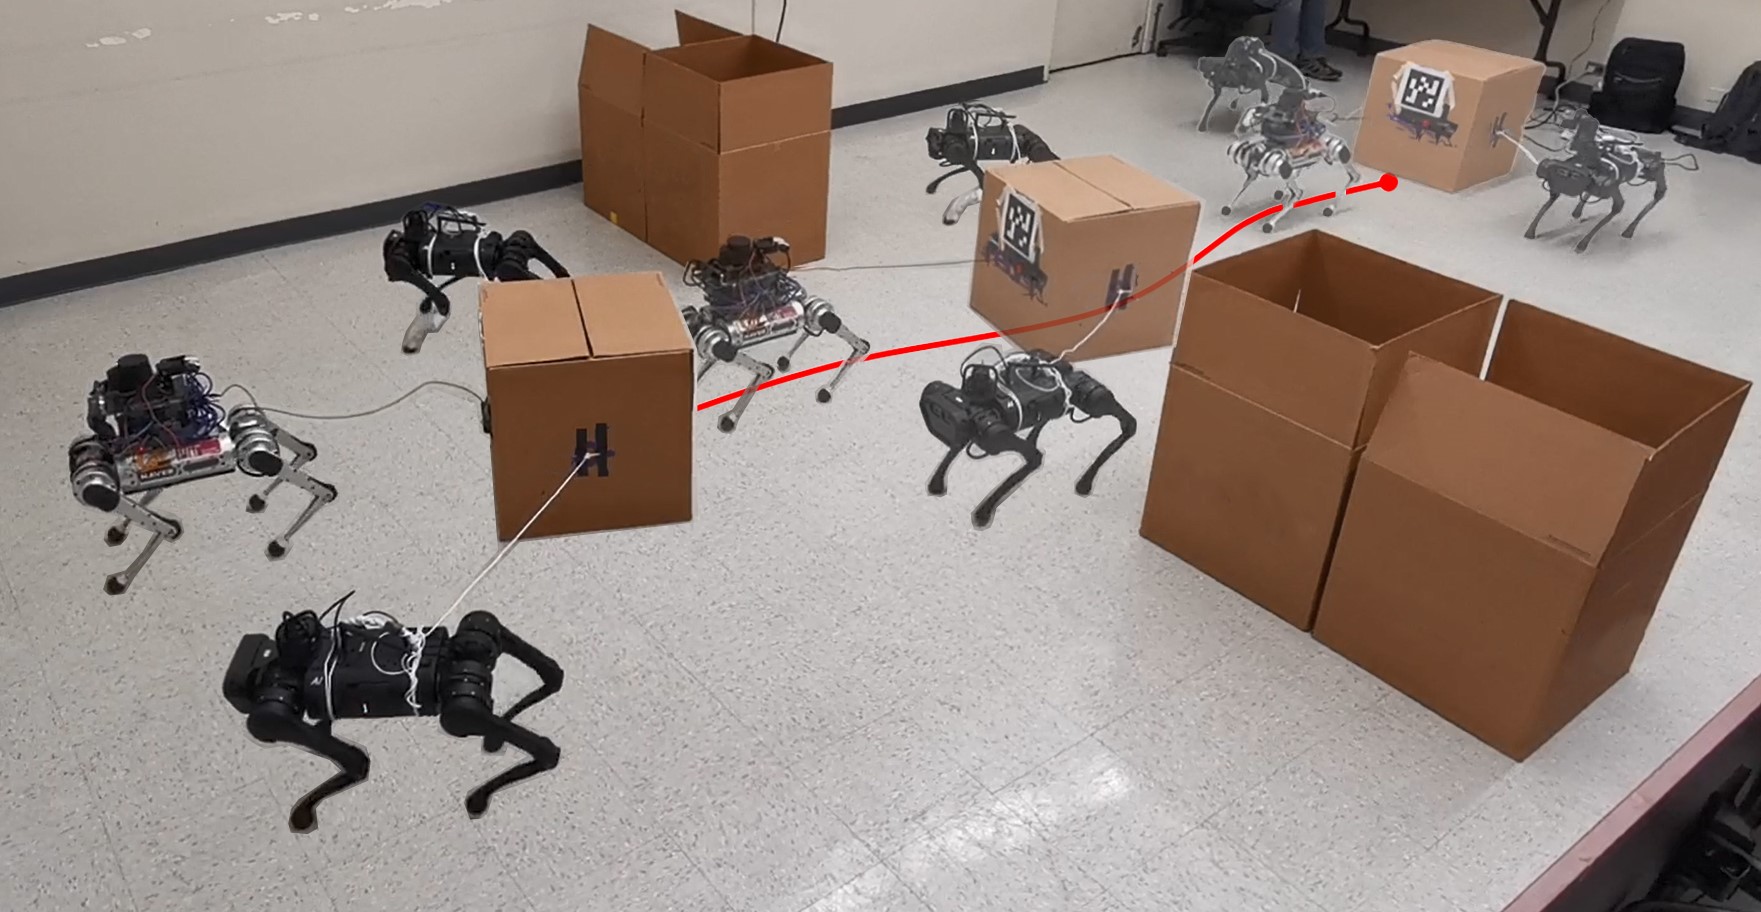 Collaborative Navigation of a Cable-towed Load by Multiple Quadrupeds